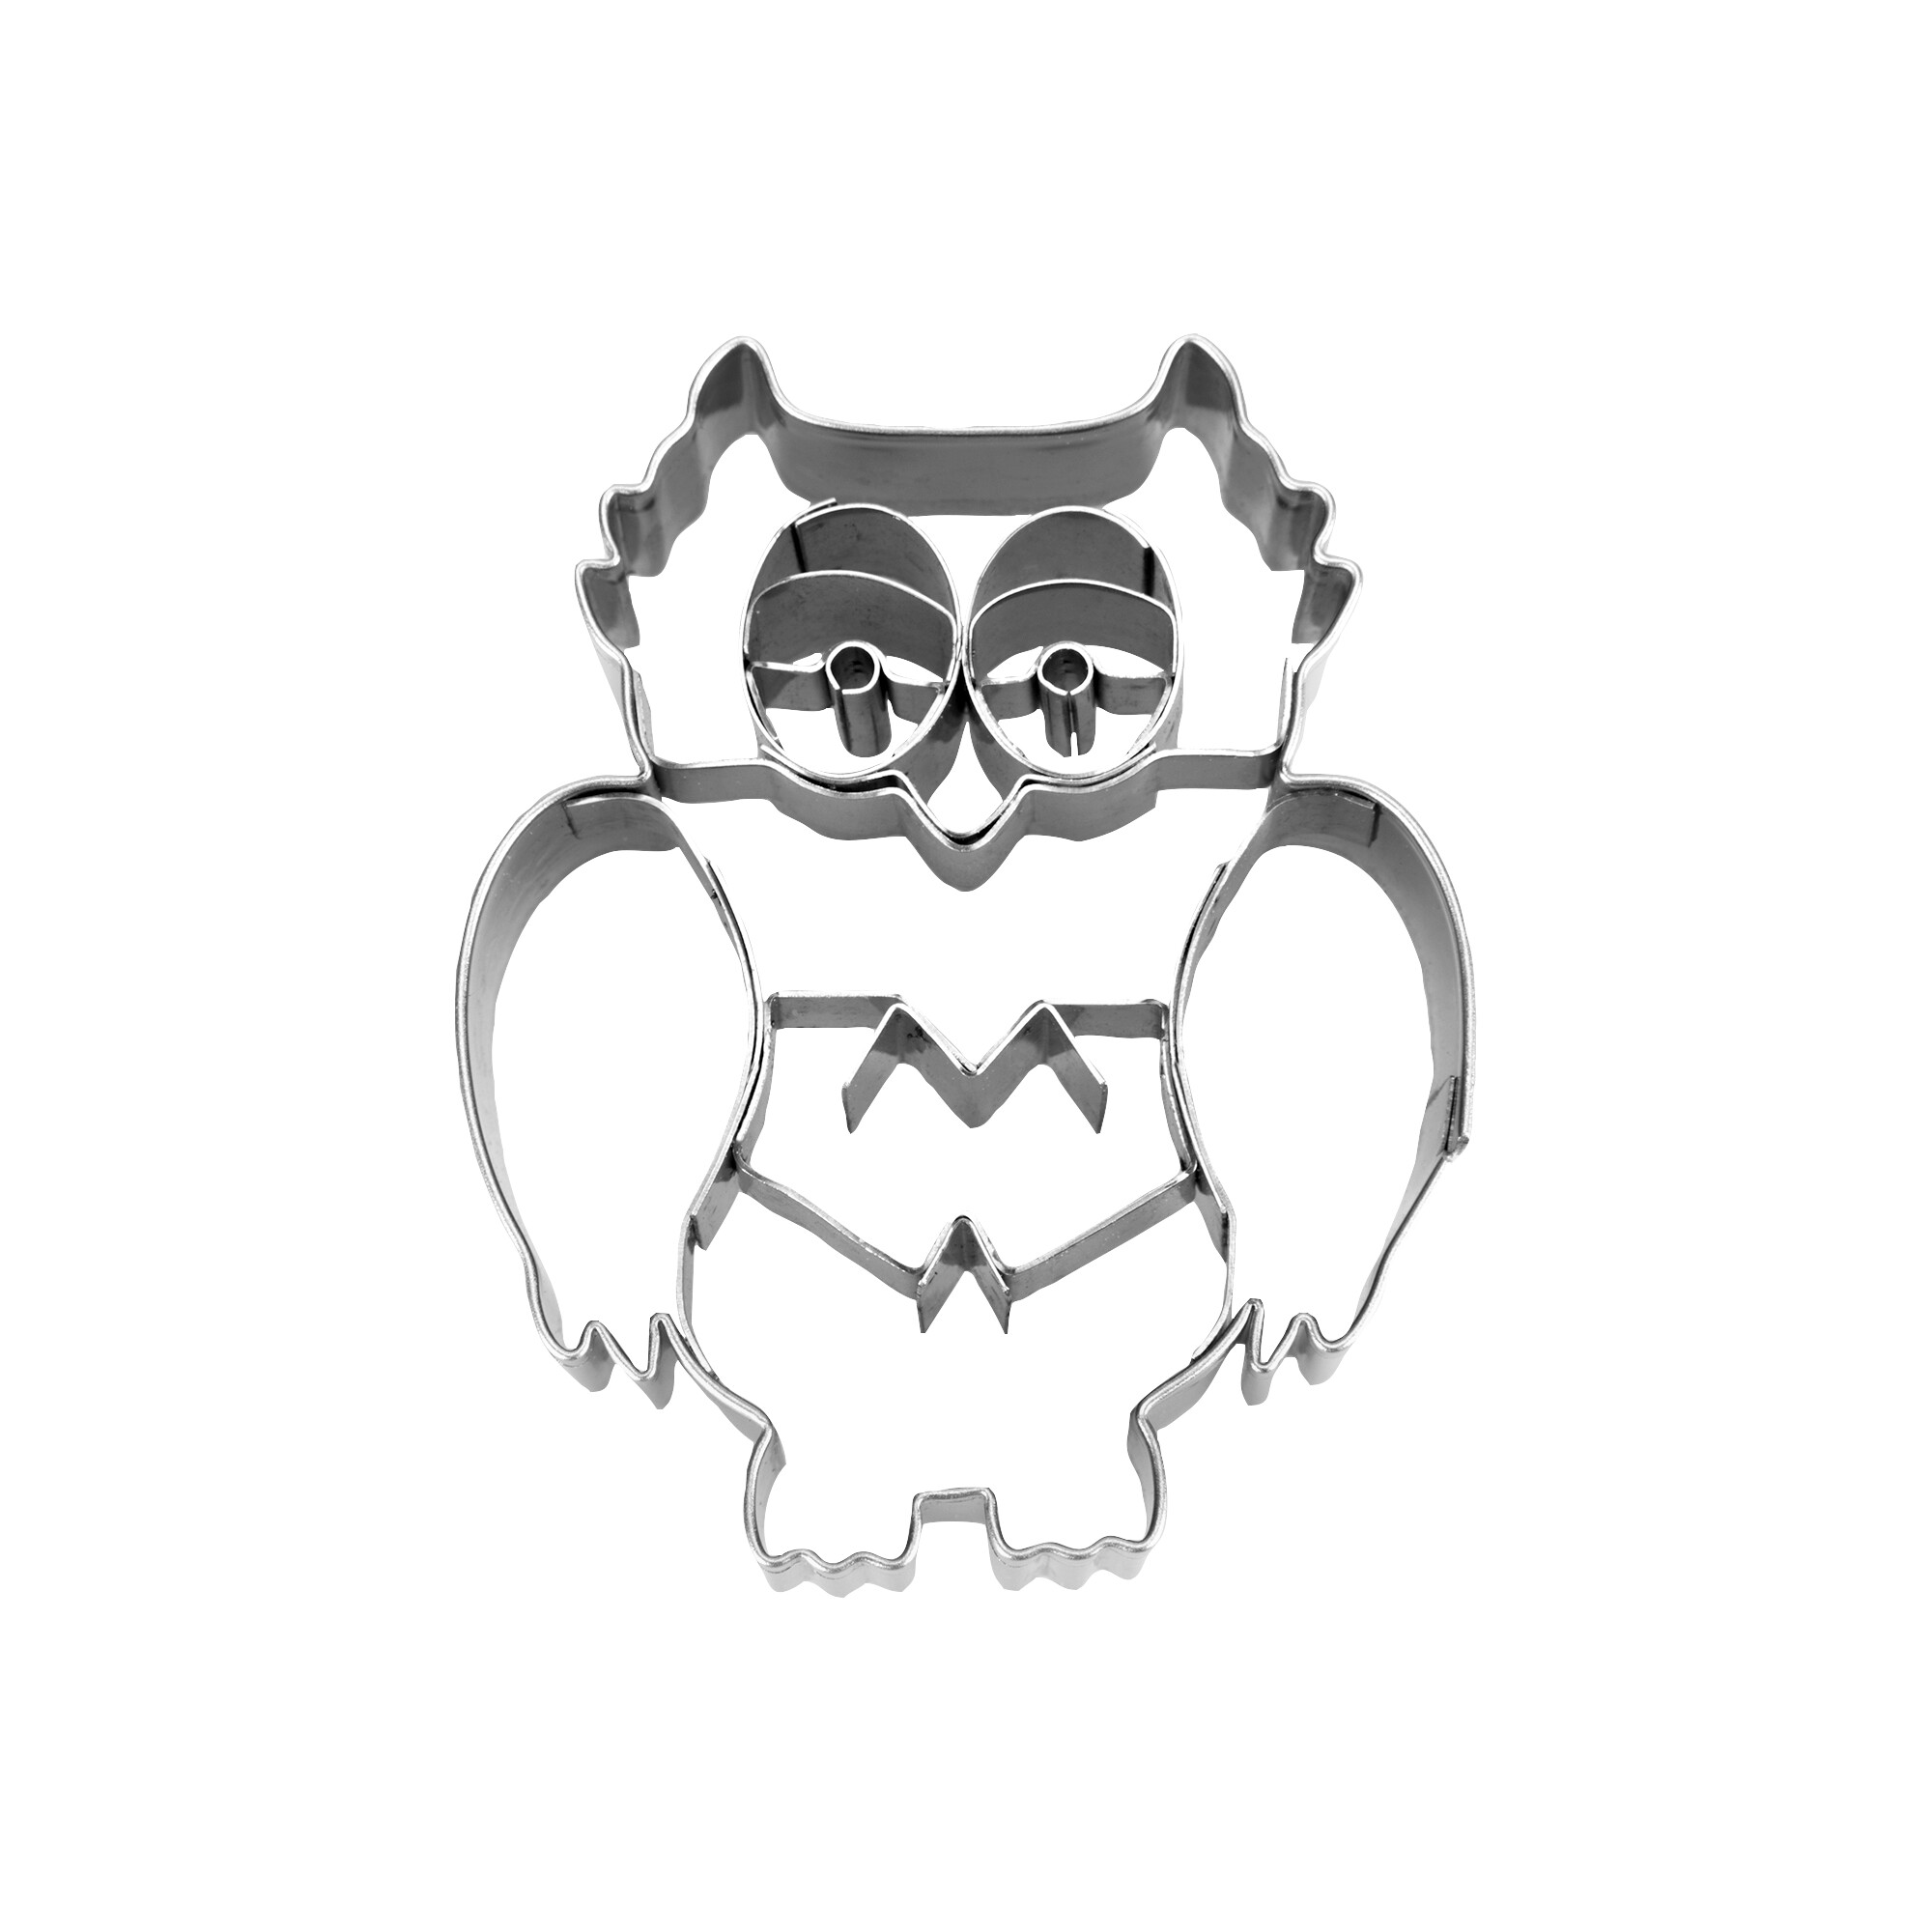 Cookie cutter with stamp – Owl